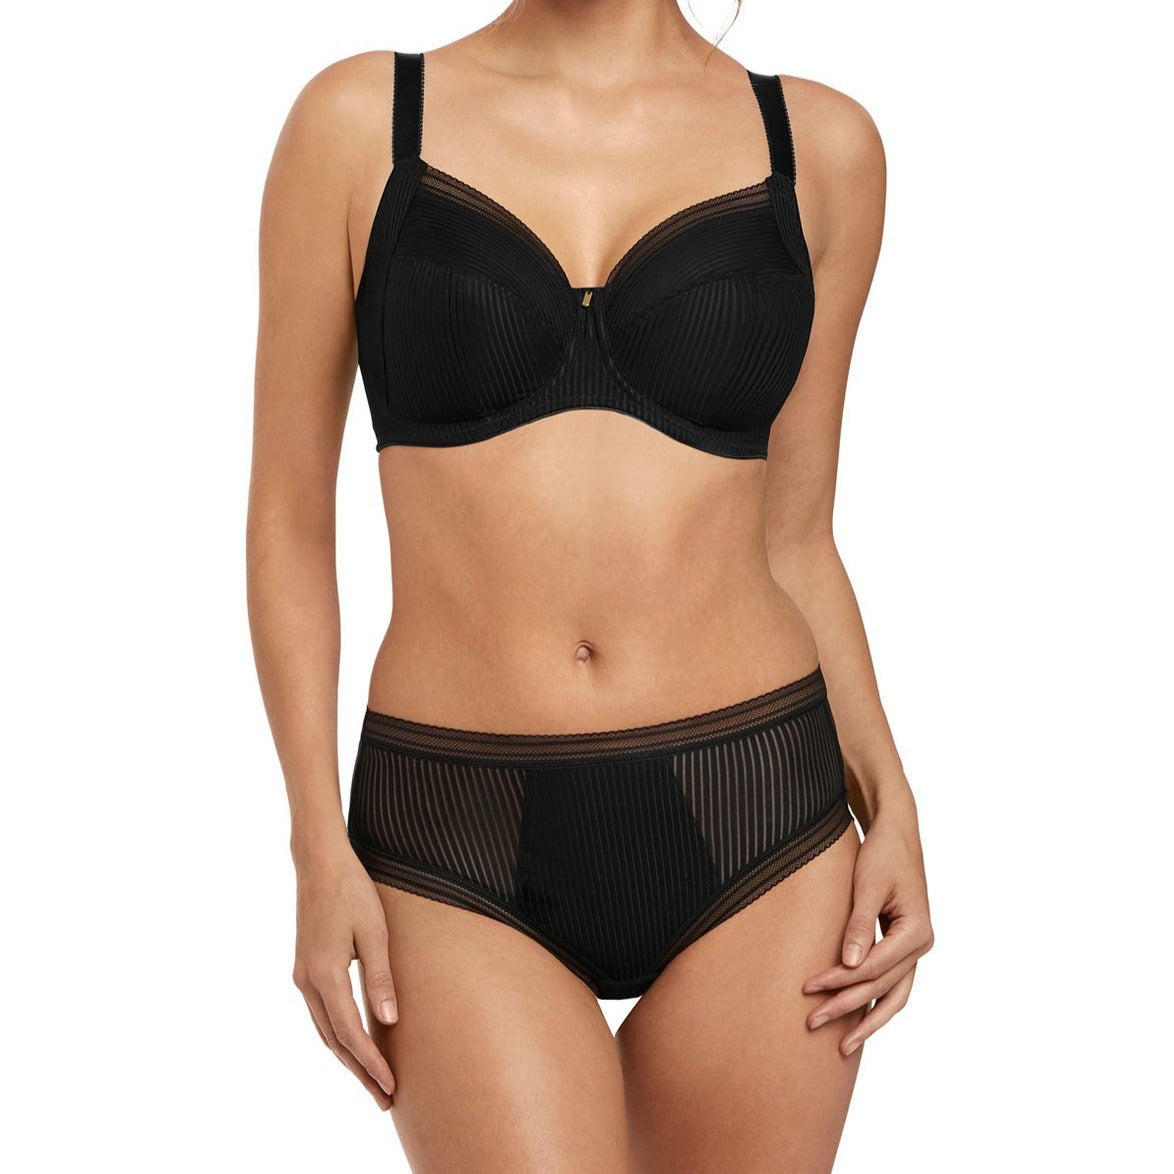 Fantasie Fusion Full Cup Side Support Bra: Coffee Roast : 32HH